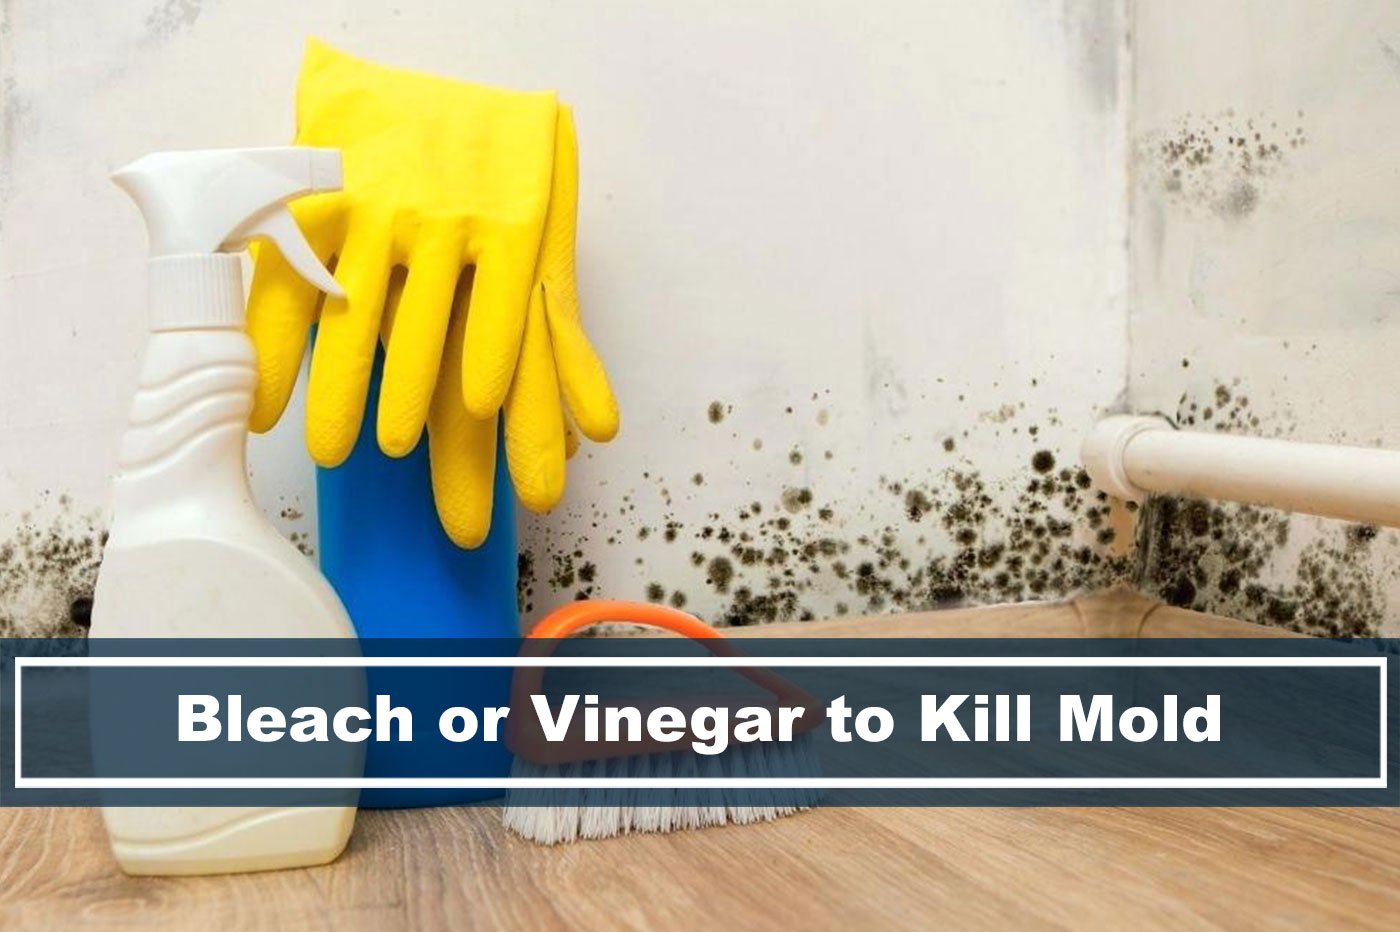 which is better? Bleach or Vinegar to killing mold?